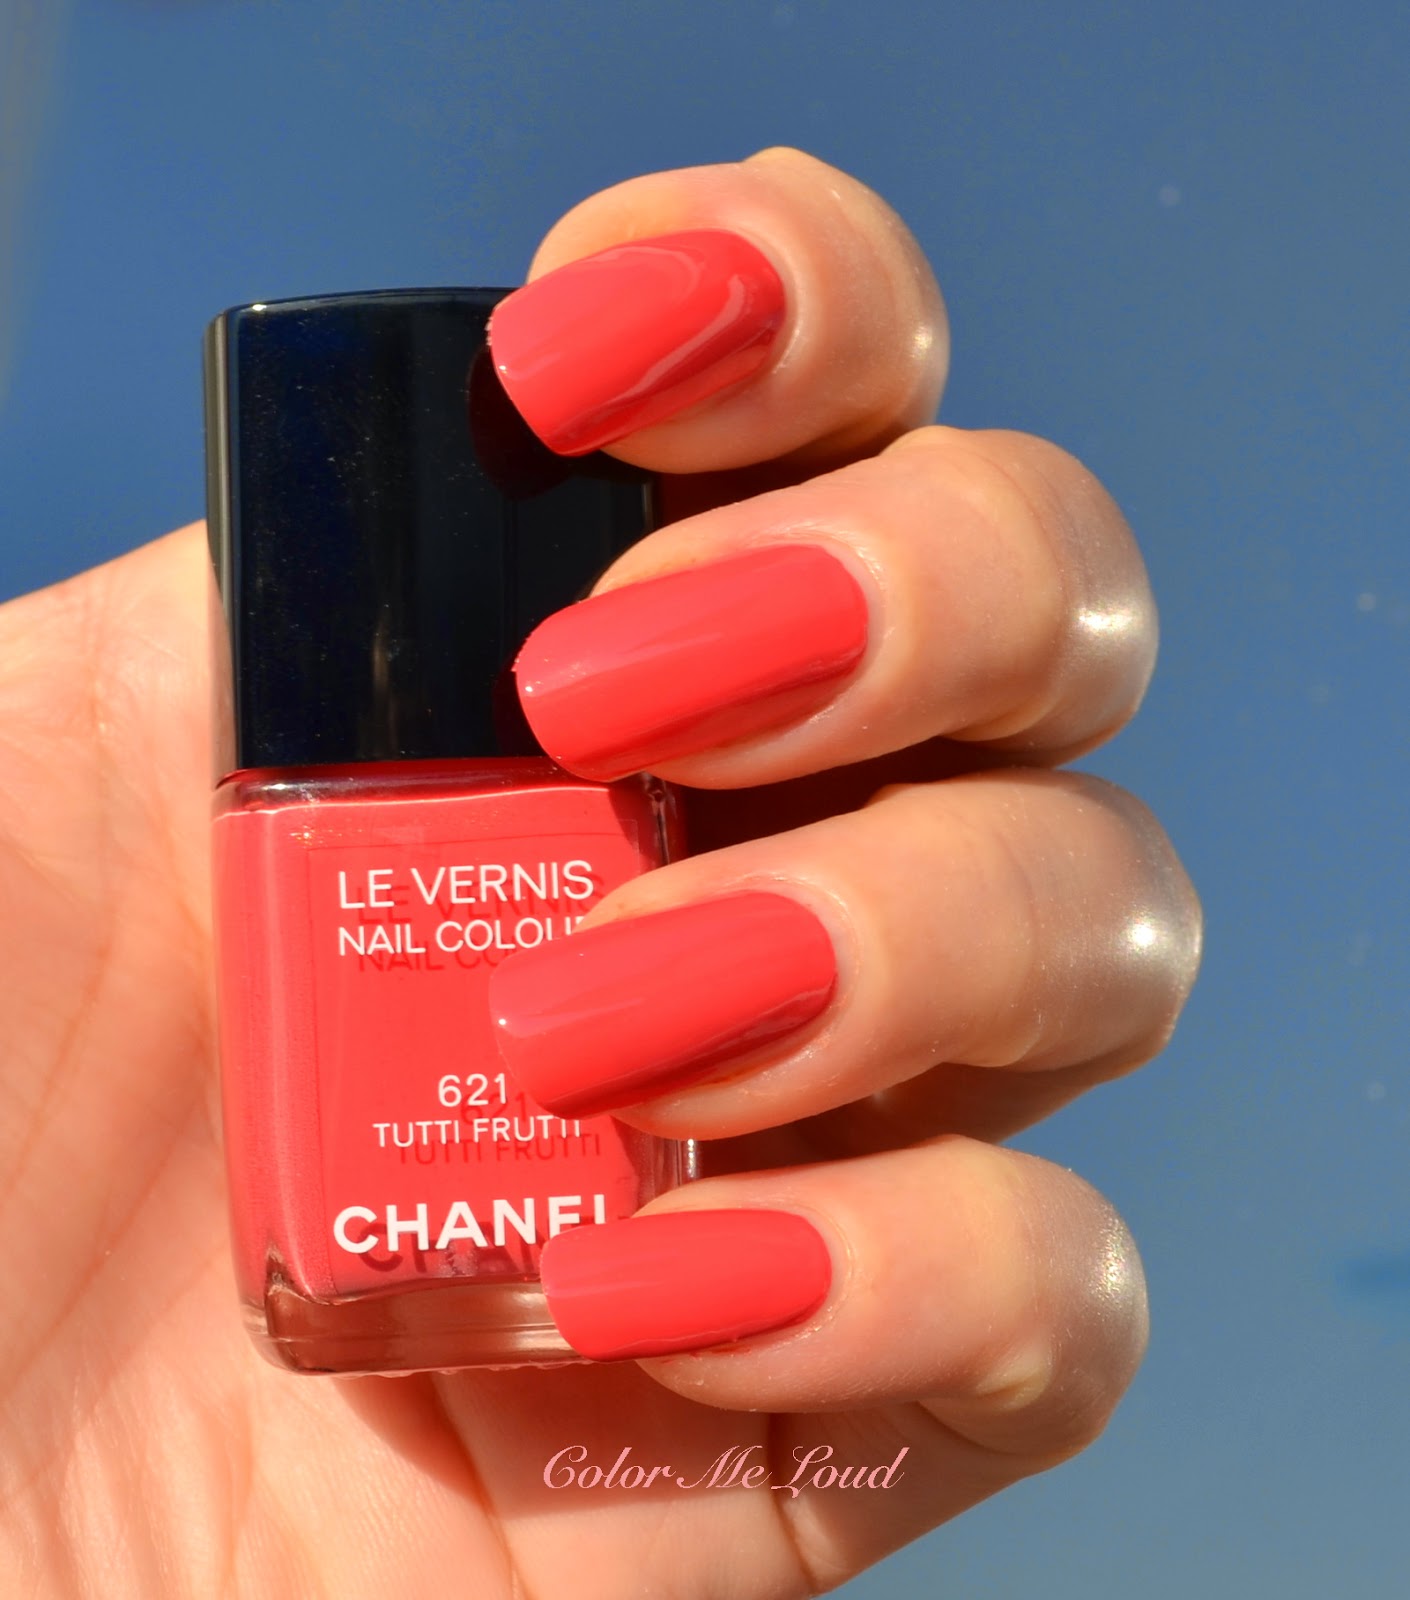 Chanel Nail Polish New Summer 2022 Limited Color  Chanel New Nail  Hydrating and Fortifying Oil 